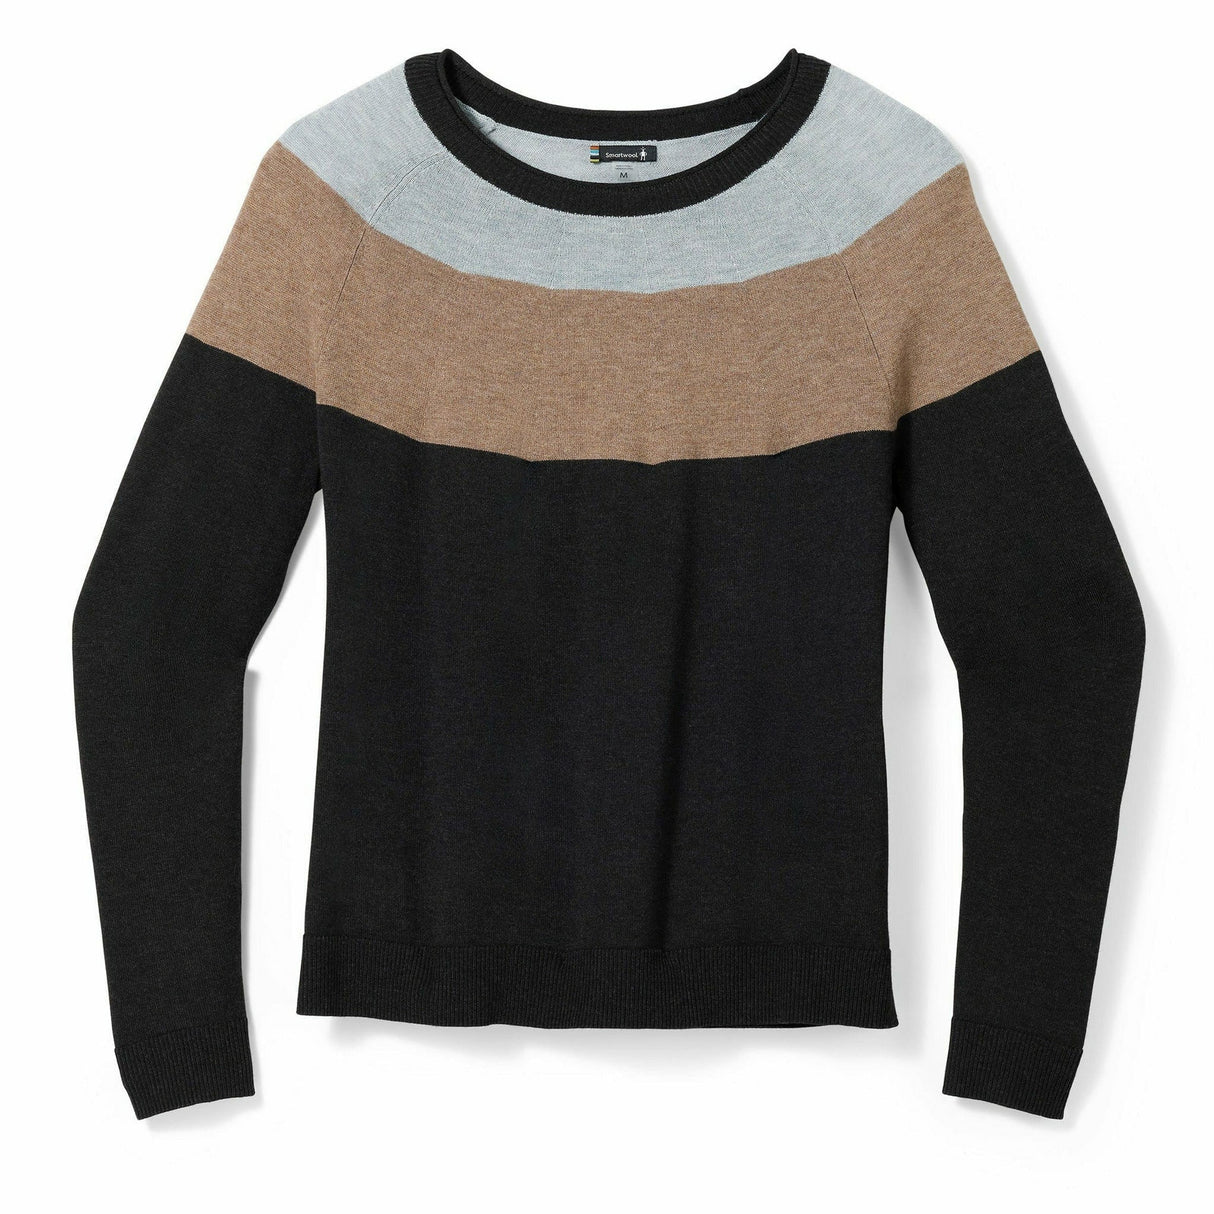 Smartwool Womens Edgewood Colorblock Crew Sweater  -  X-Small / Charcoal Heather